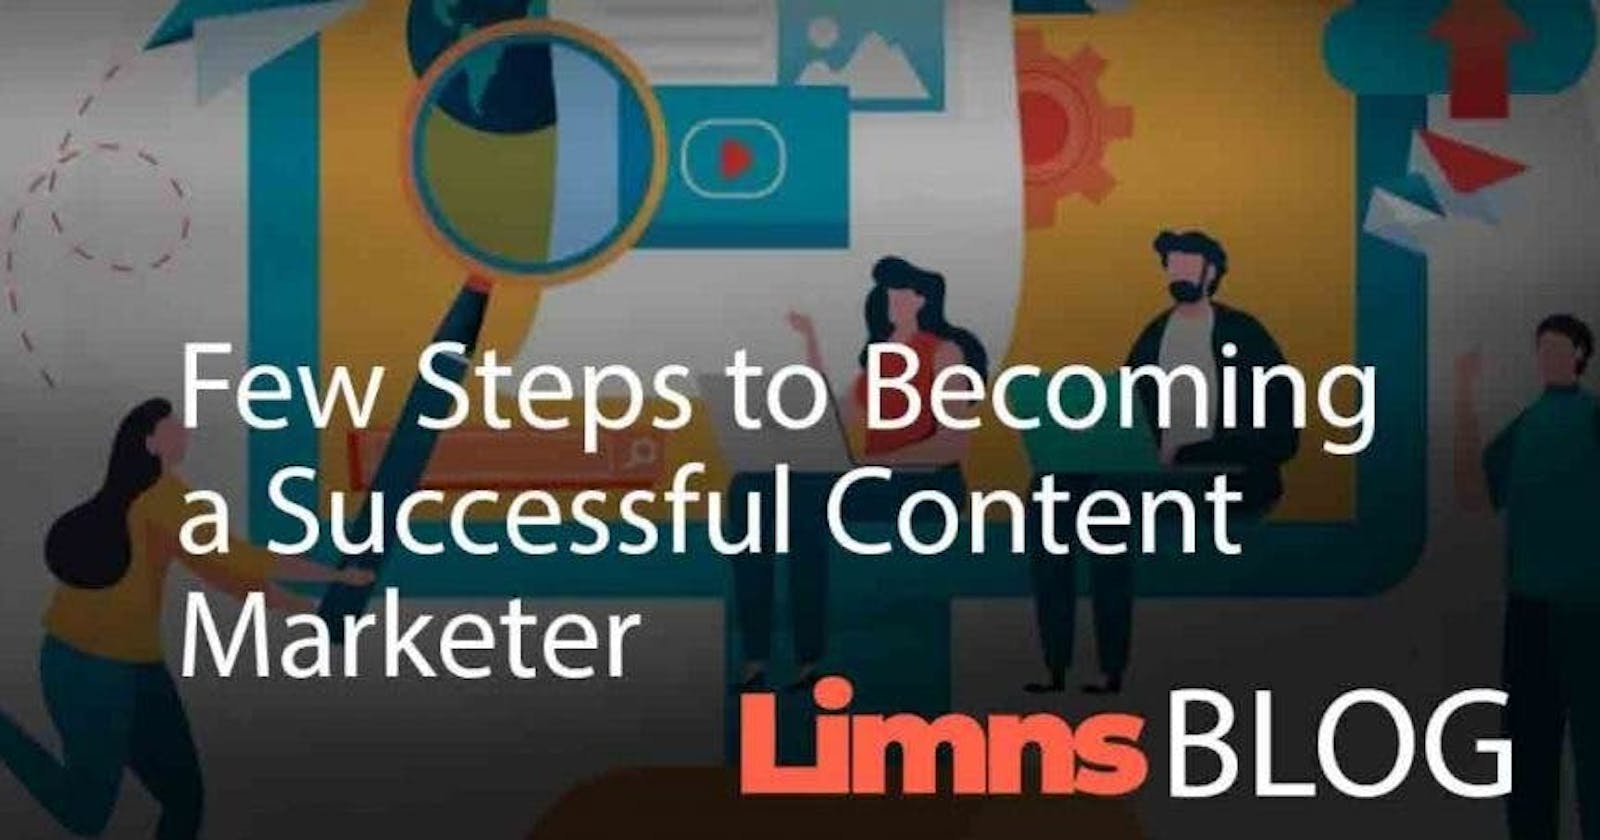 Few steps to becoming a successful content marketer